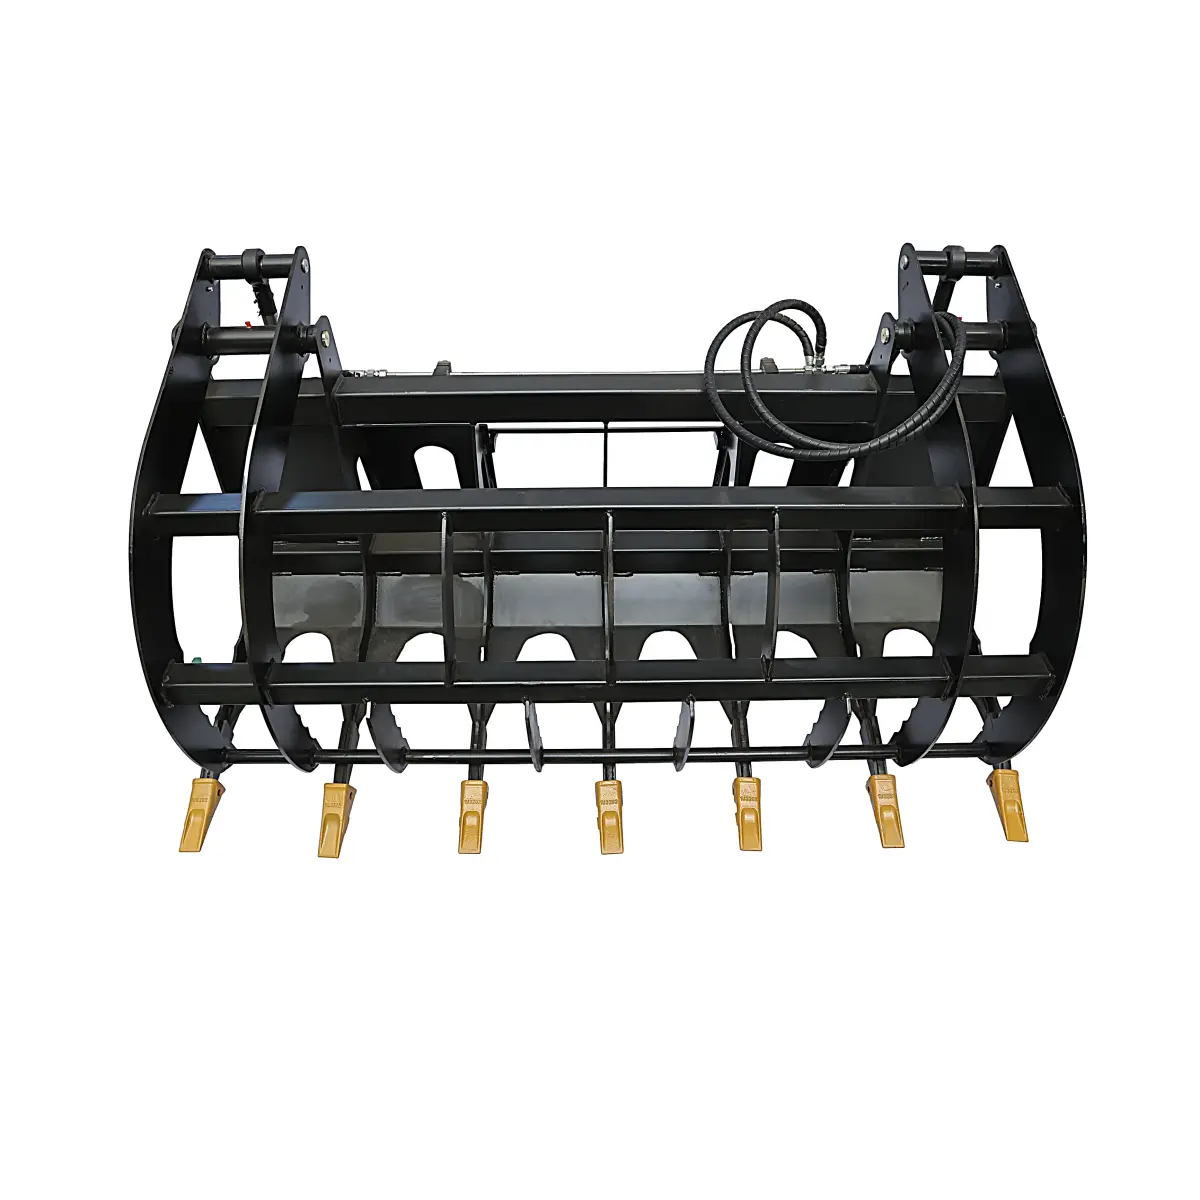 Value Industrial 78" Root Grapple, 420kg, Heavy Duty